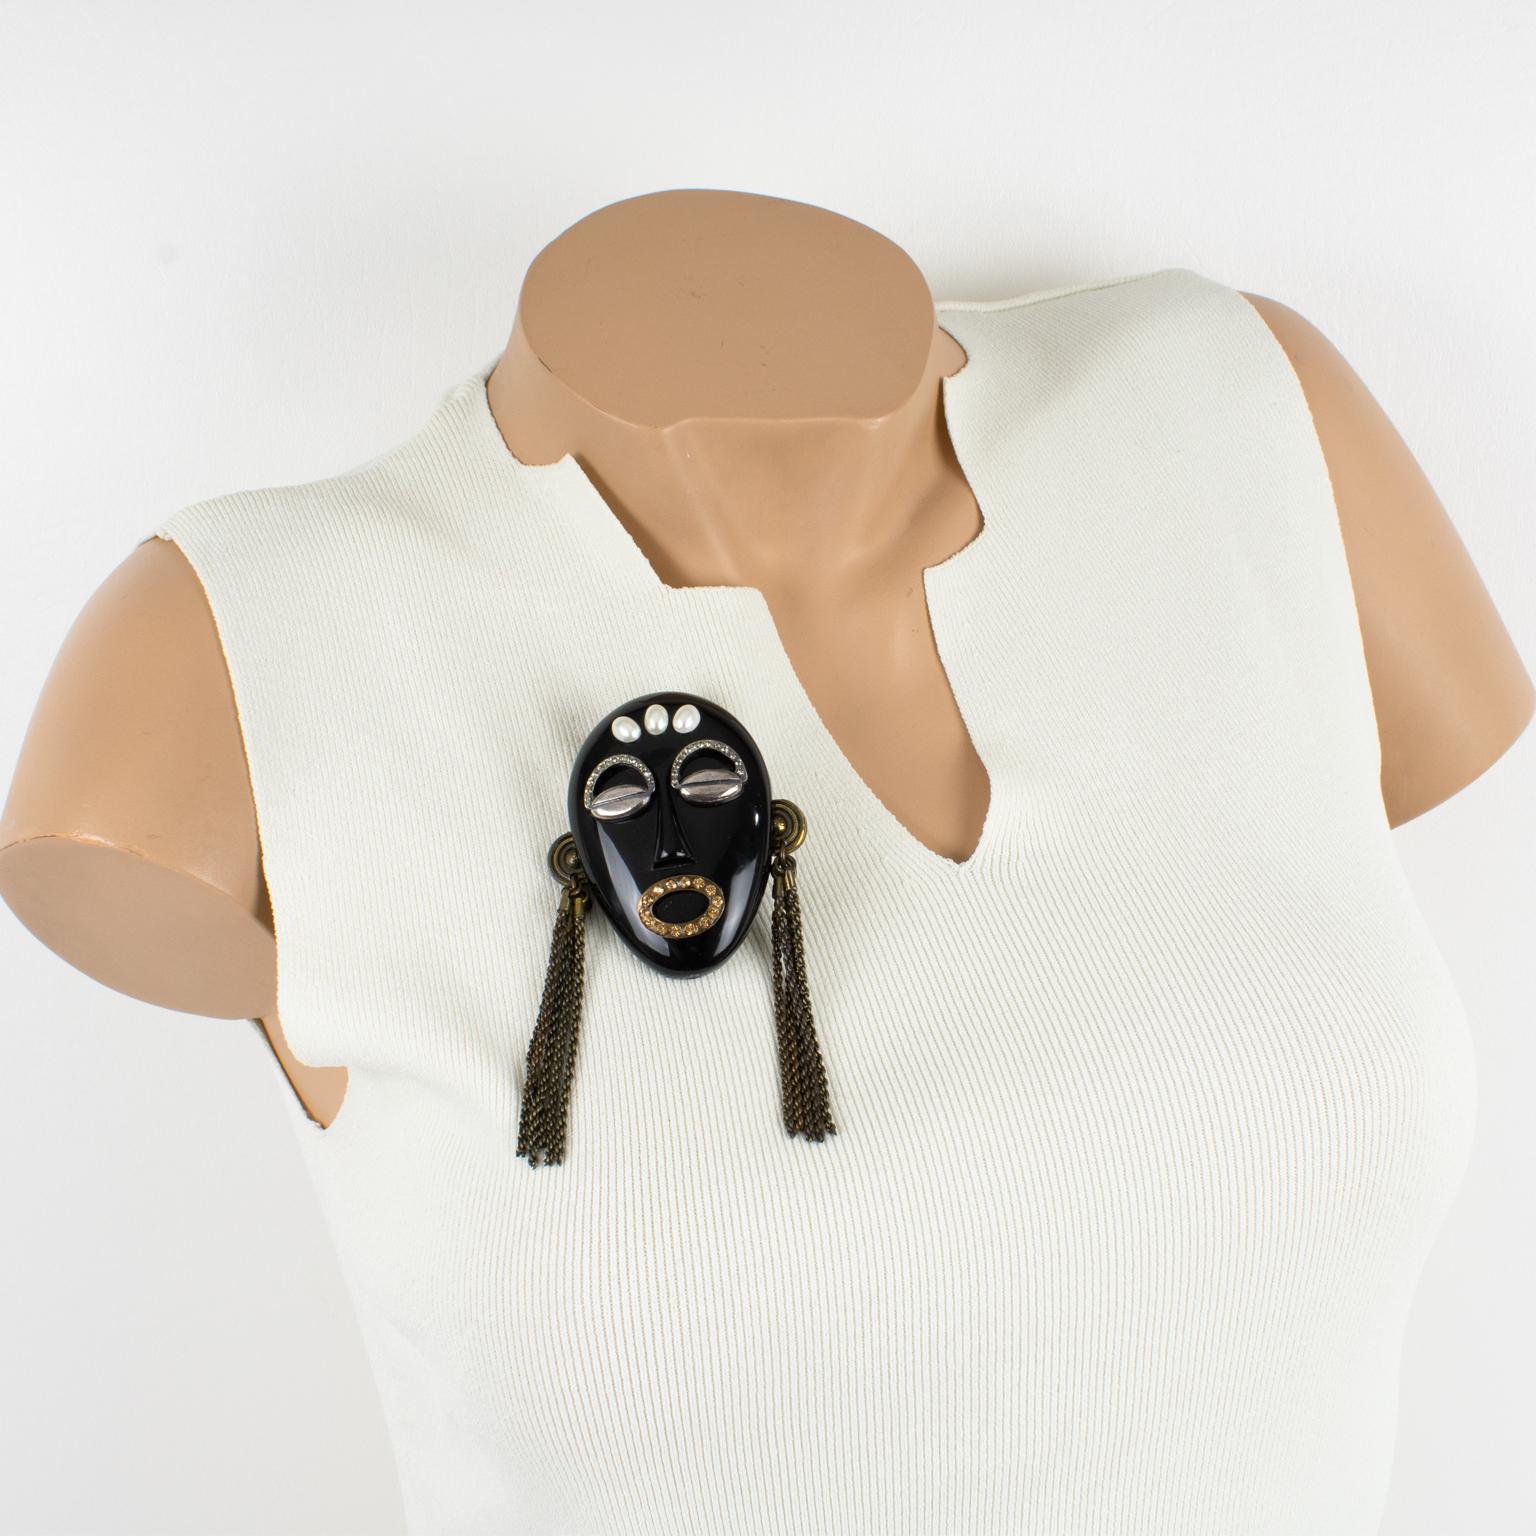 This is a rare iconic Missoni Italy brooch designed for their 1991 jewelry collection. The pin features a dimensional oversized carved tribal mask in black resin ornate with silver plate coffee bean eyes with tiny crystal rhinestones eyebrows. The